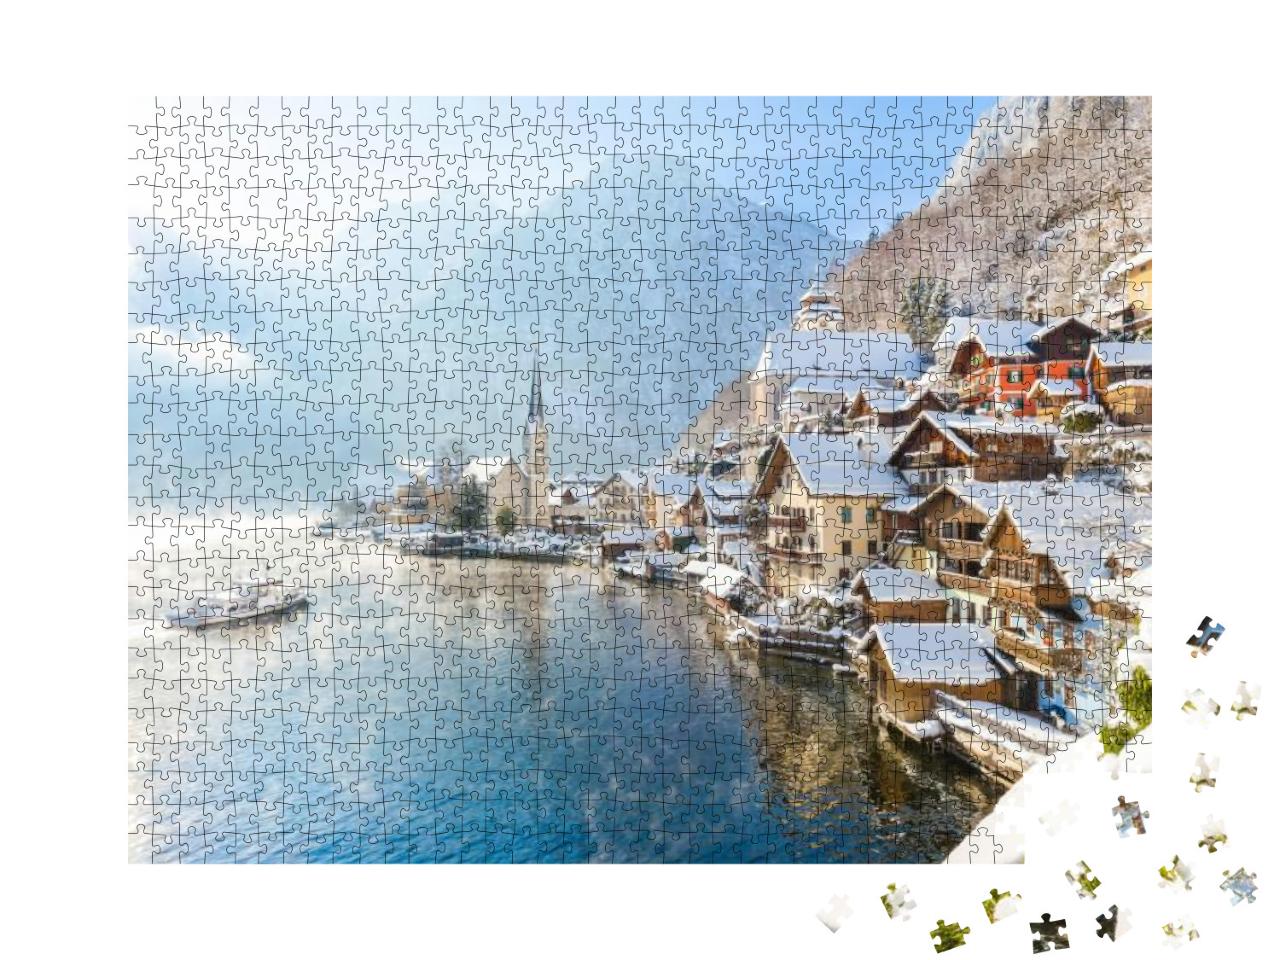 Classic Postcard View of Famous Hallstatt Lakeside Town i... Jigsaw Puzzle with 1000 pieces